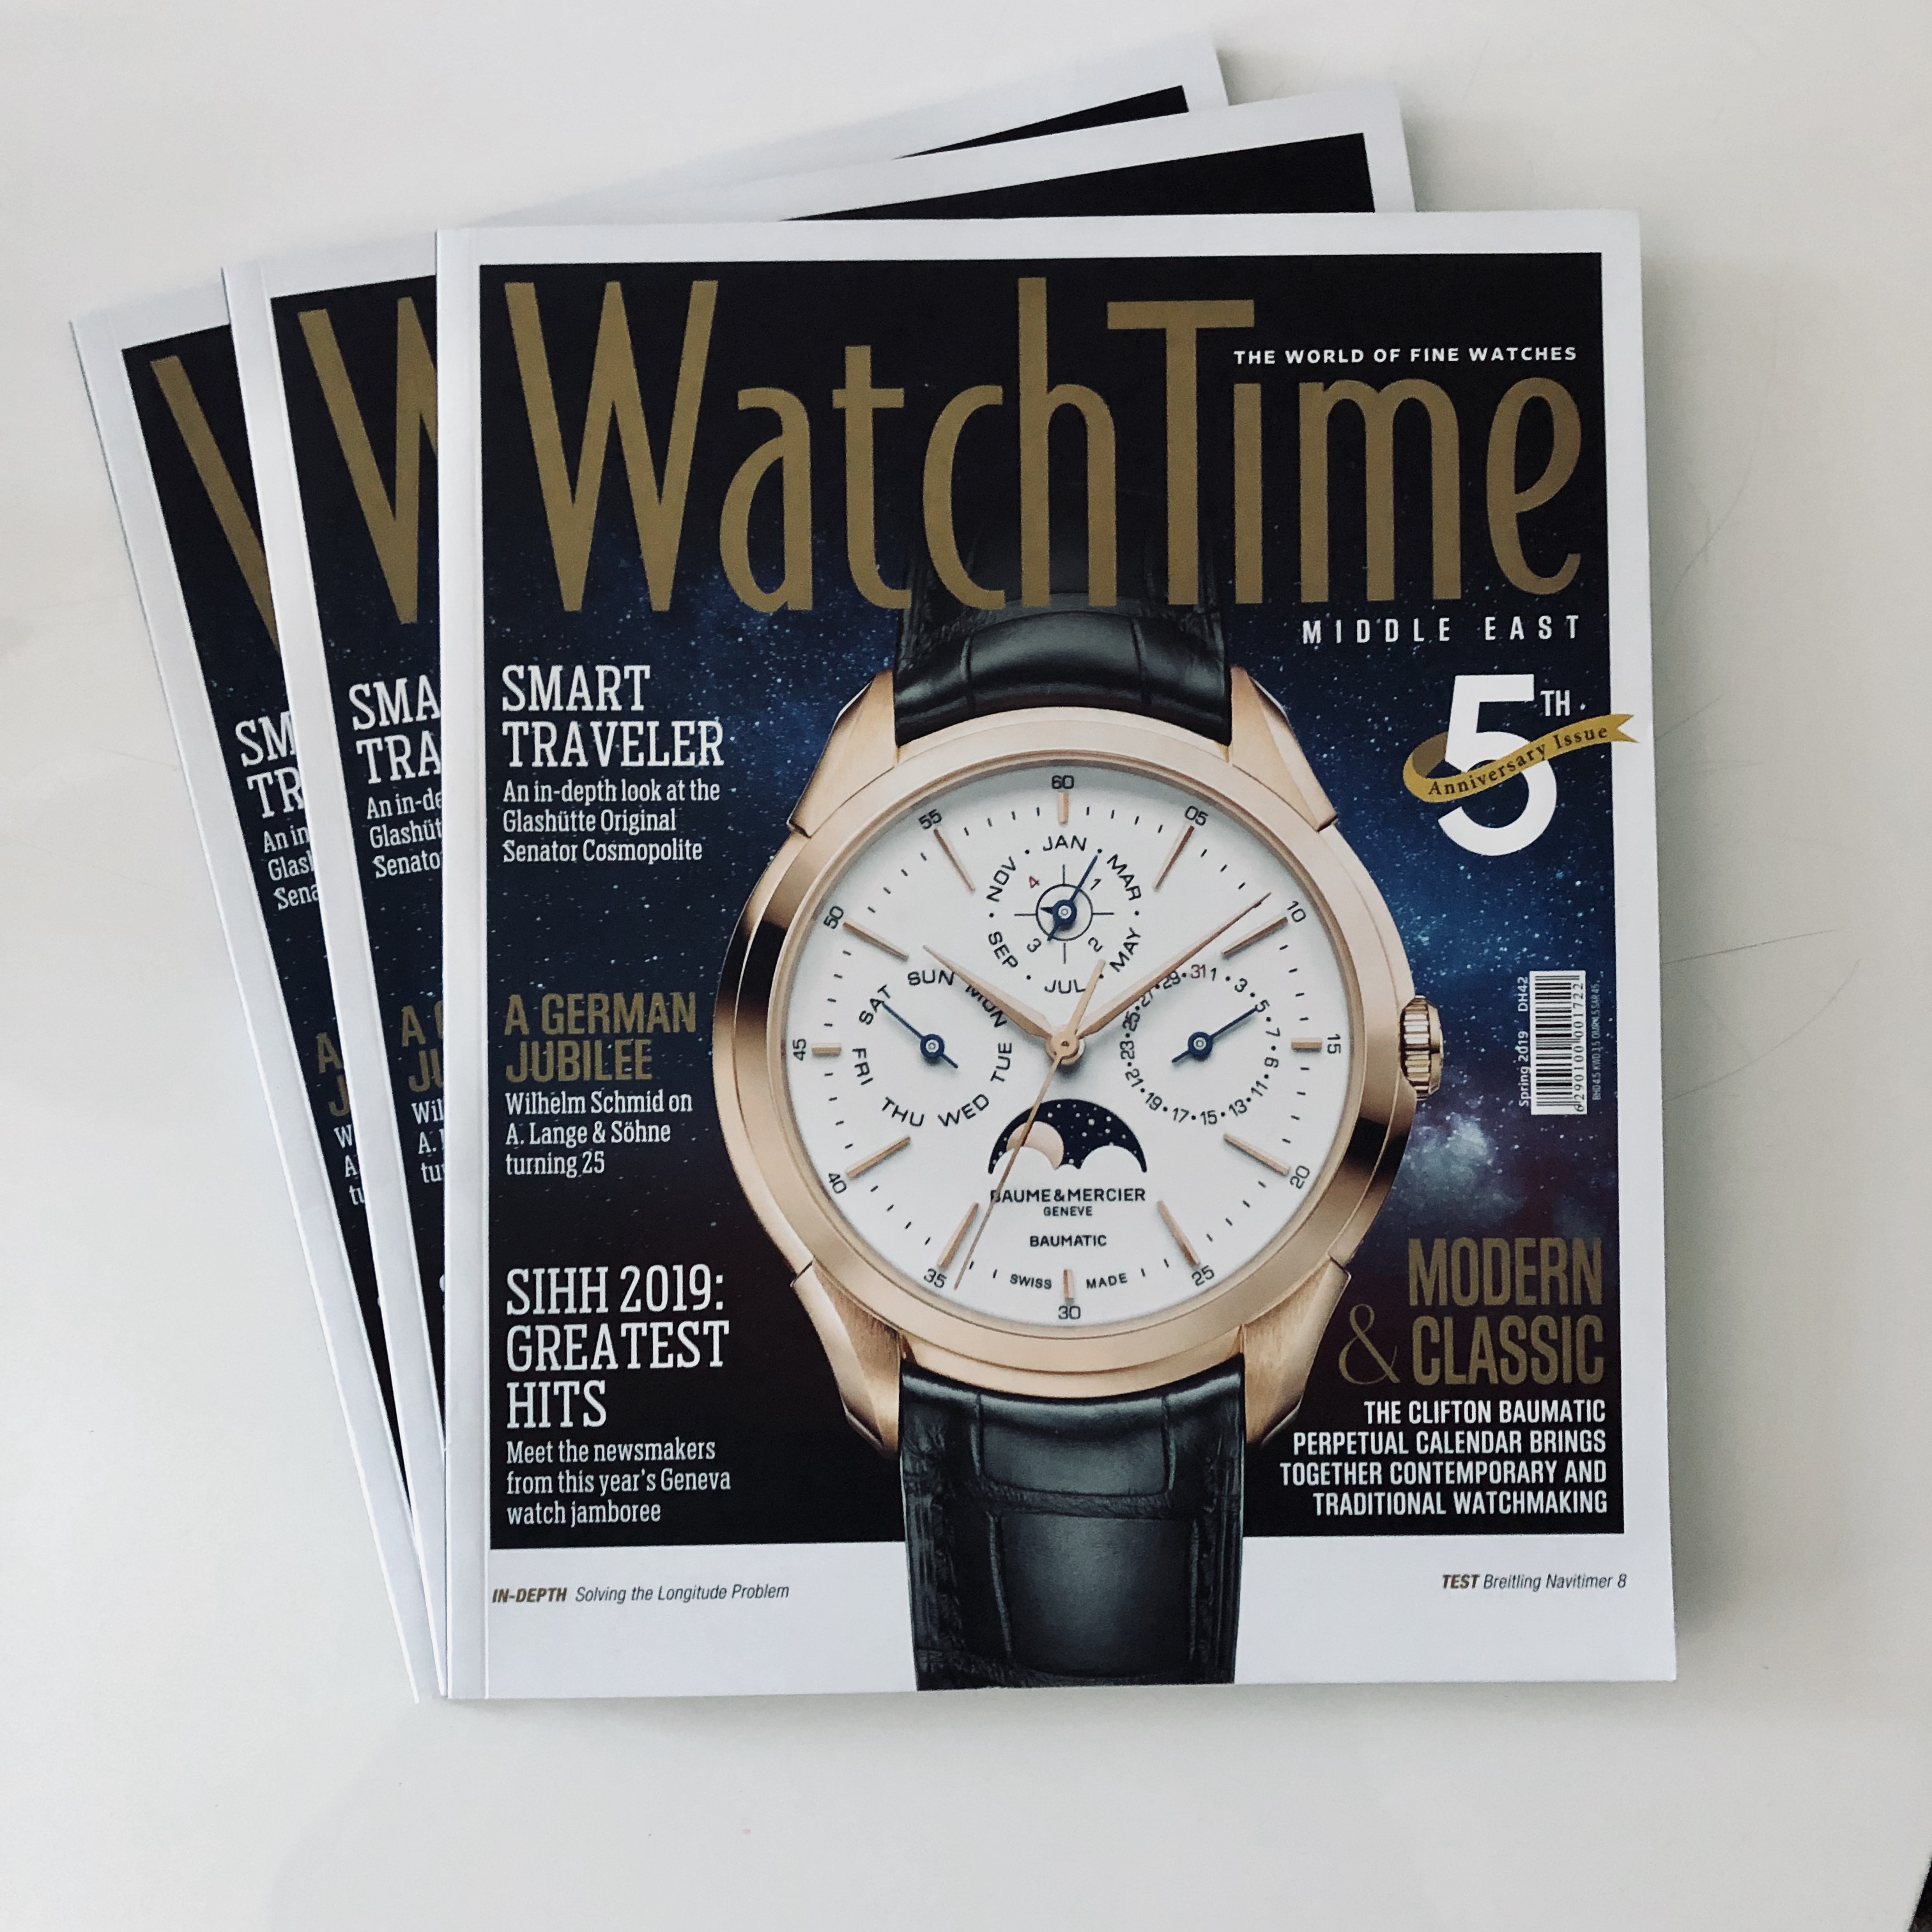 Middle East edition of Watch Time magazine